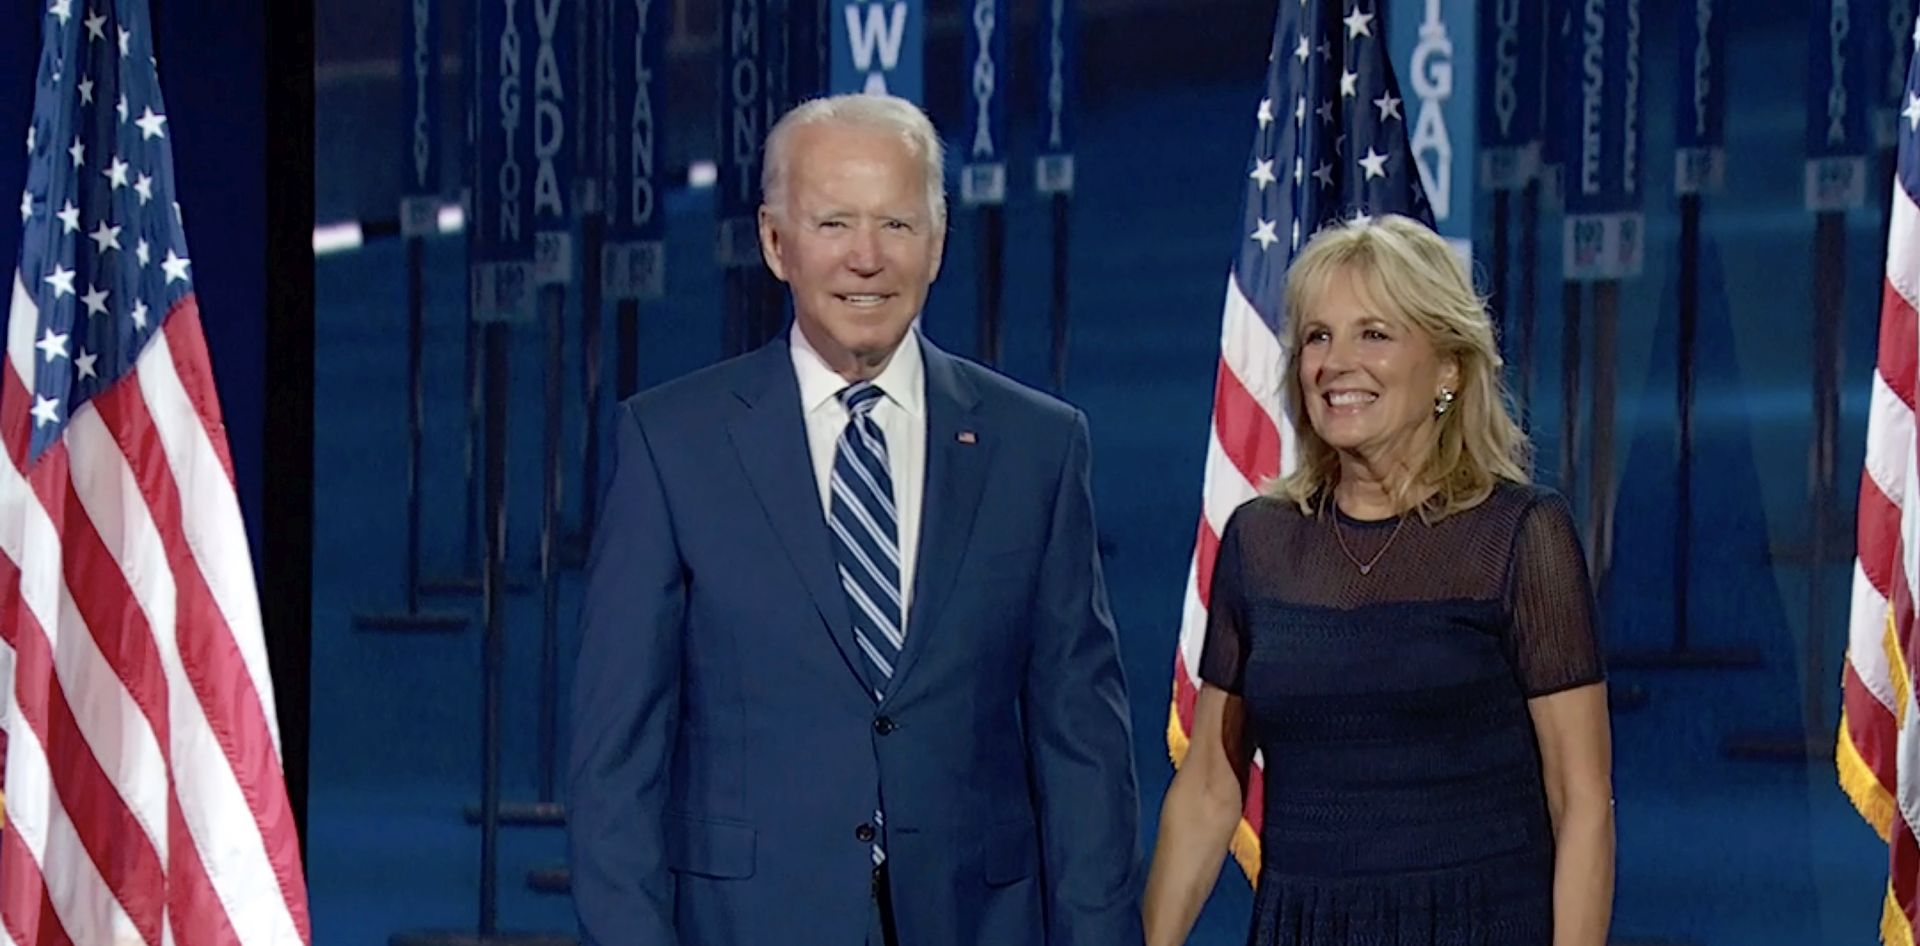 epa08613797 A framegrab from the Democratic National Convention Committee livestream showing former Vice President Joe Biden (L) and Dr. Jill Biden (R) onstage after Senator Kamala Harris spoke during the third night of the 2020 Democratic National Convention (DNC) in Milwaukee, Wisconsin, USA, 19 August 2020. The convention, which was expected to draw 50,000 people to the city, is now taking place virtually due to coronavirus pandemic concerns.  EPA/DNCC